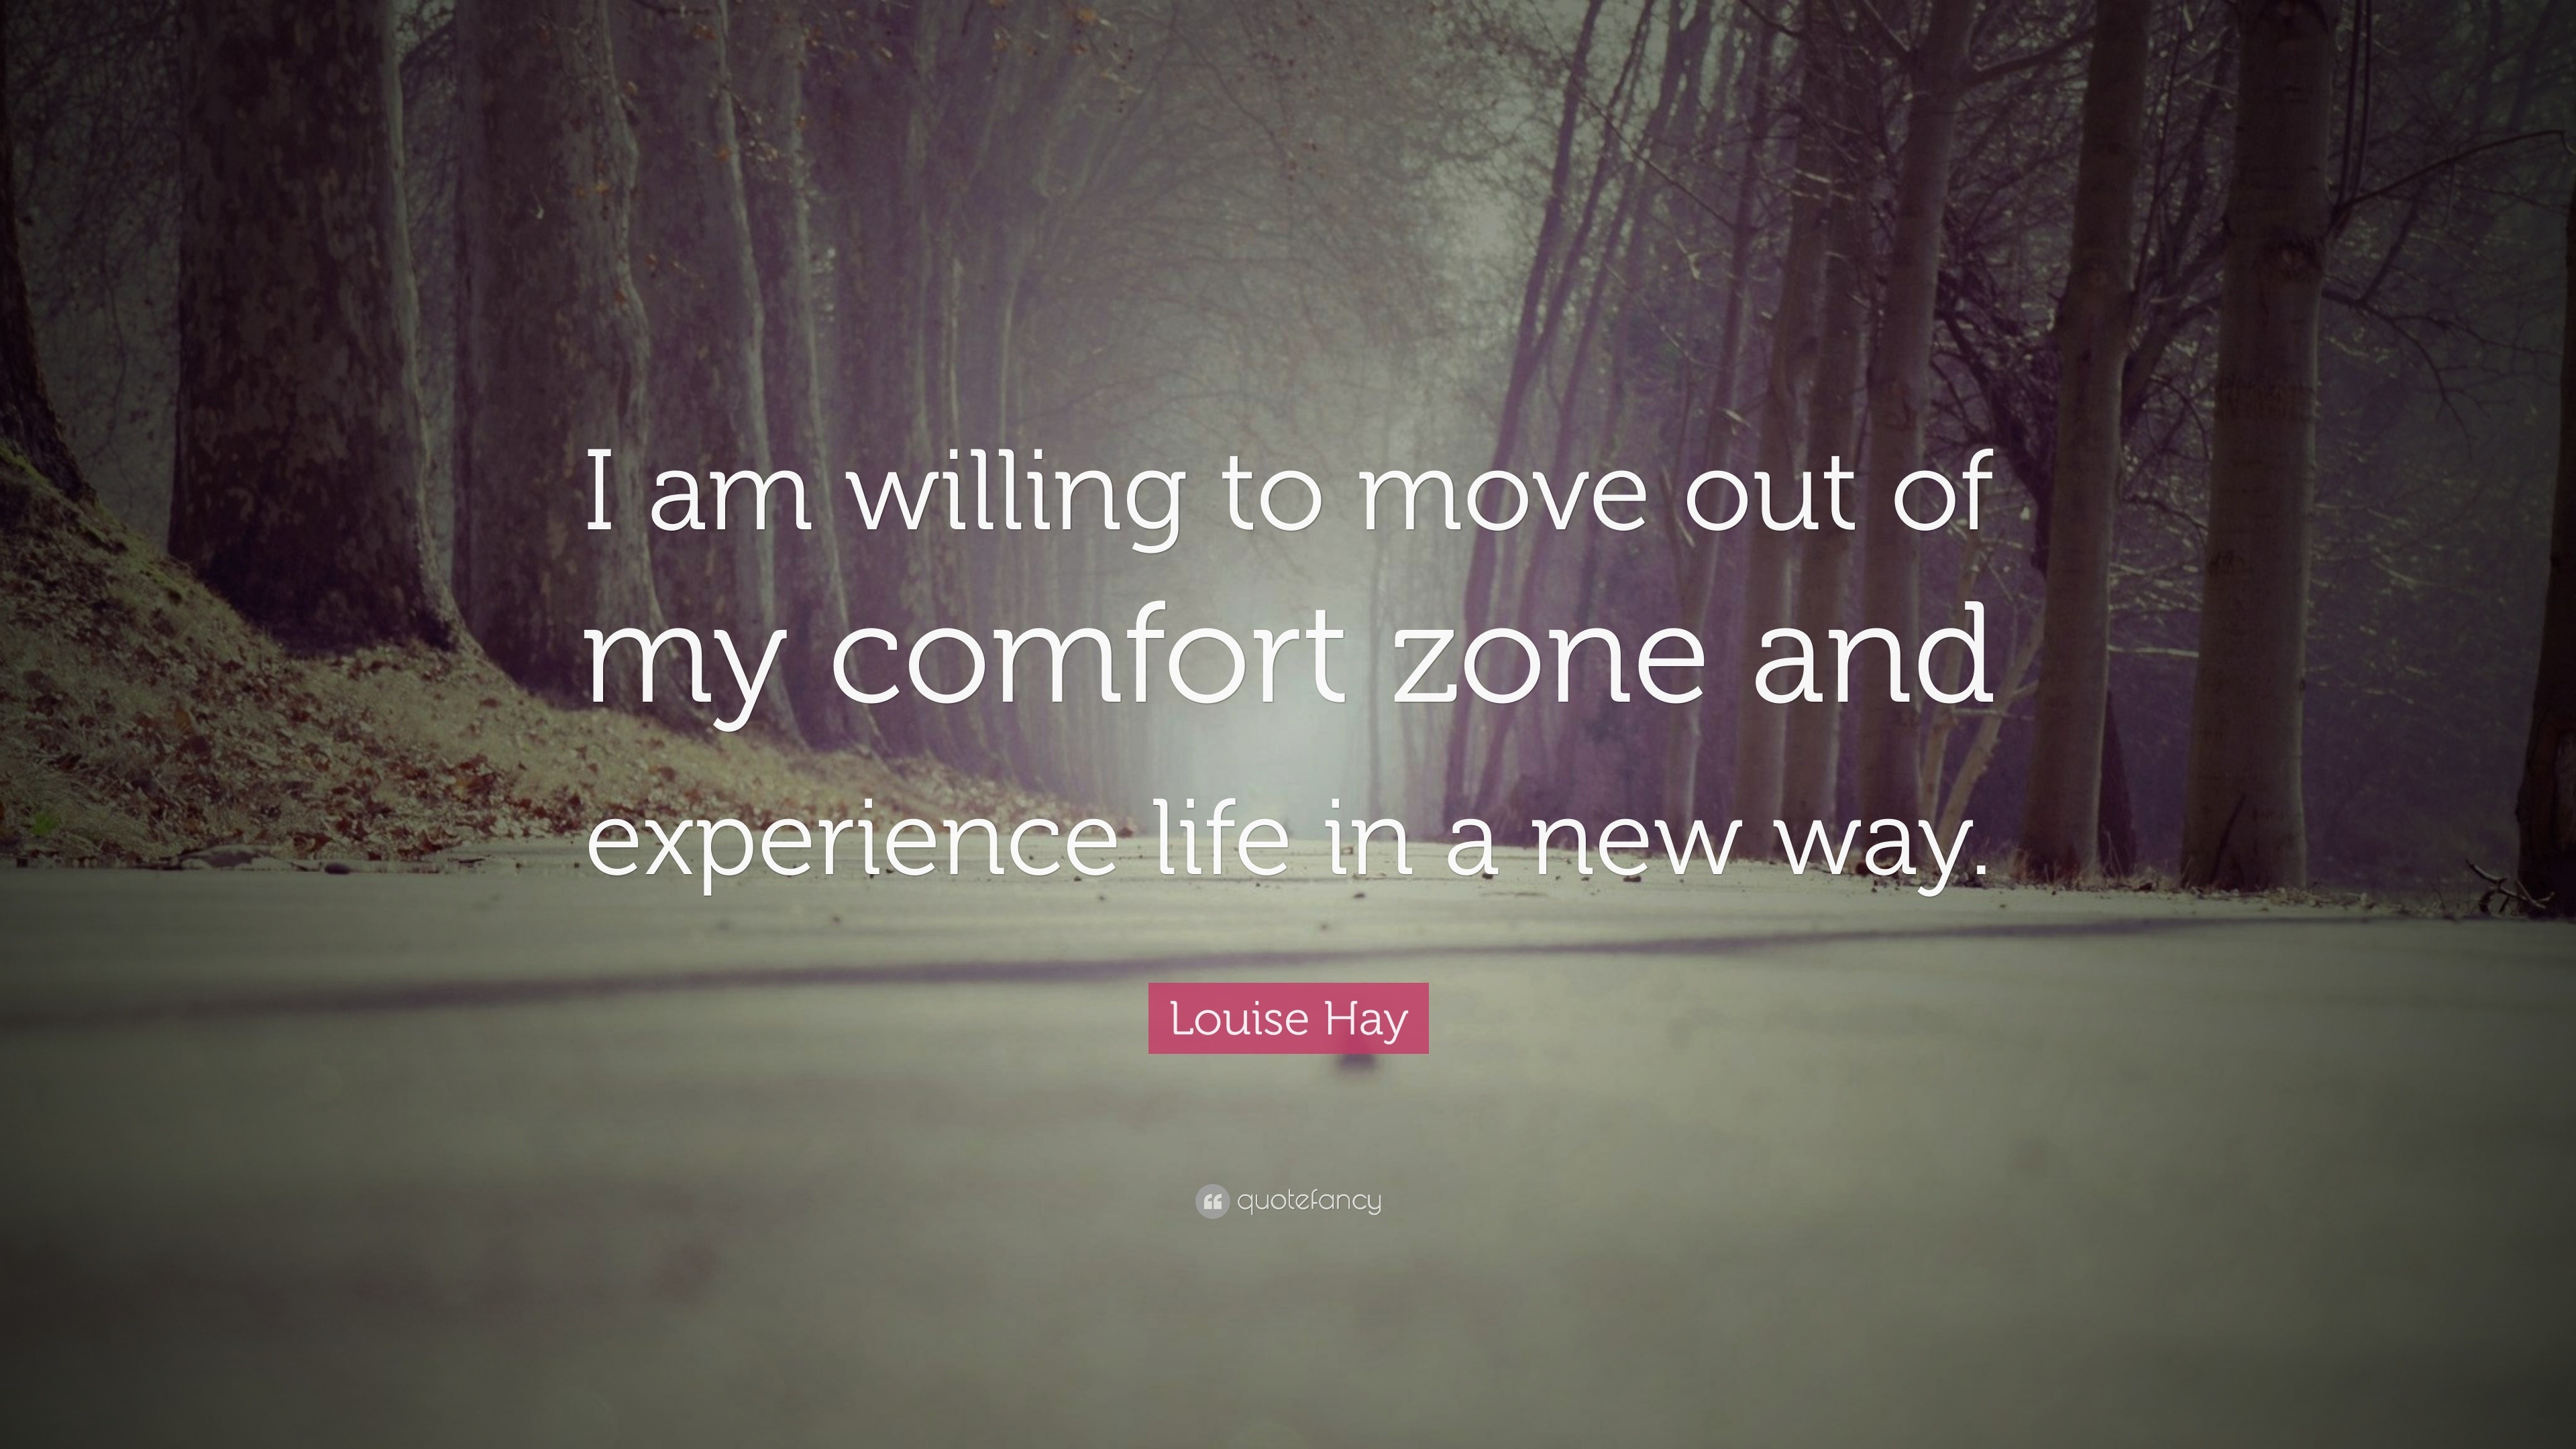 Louise Hay Quote “I am willing to move out of my fort zone and